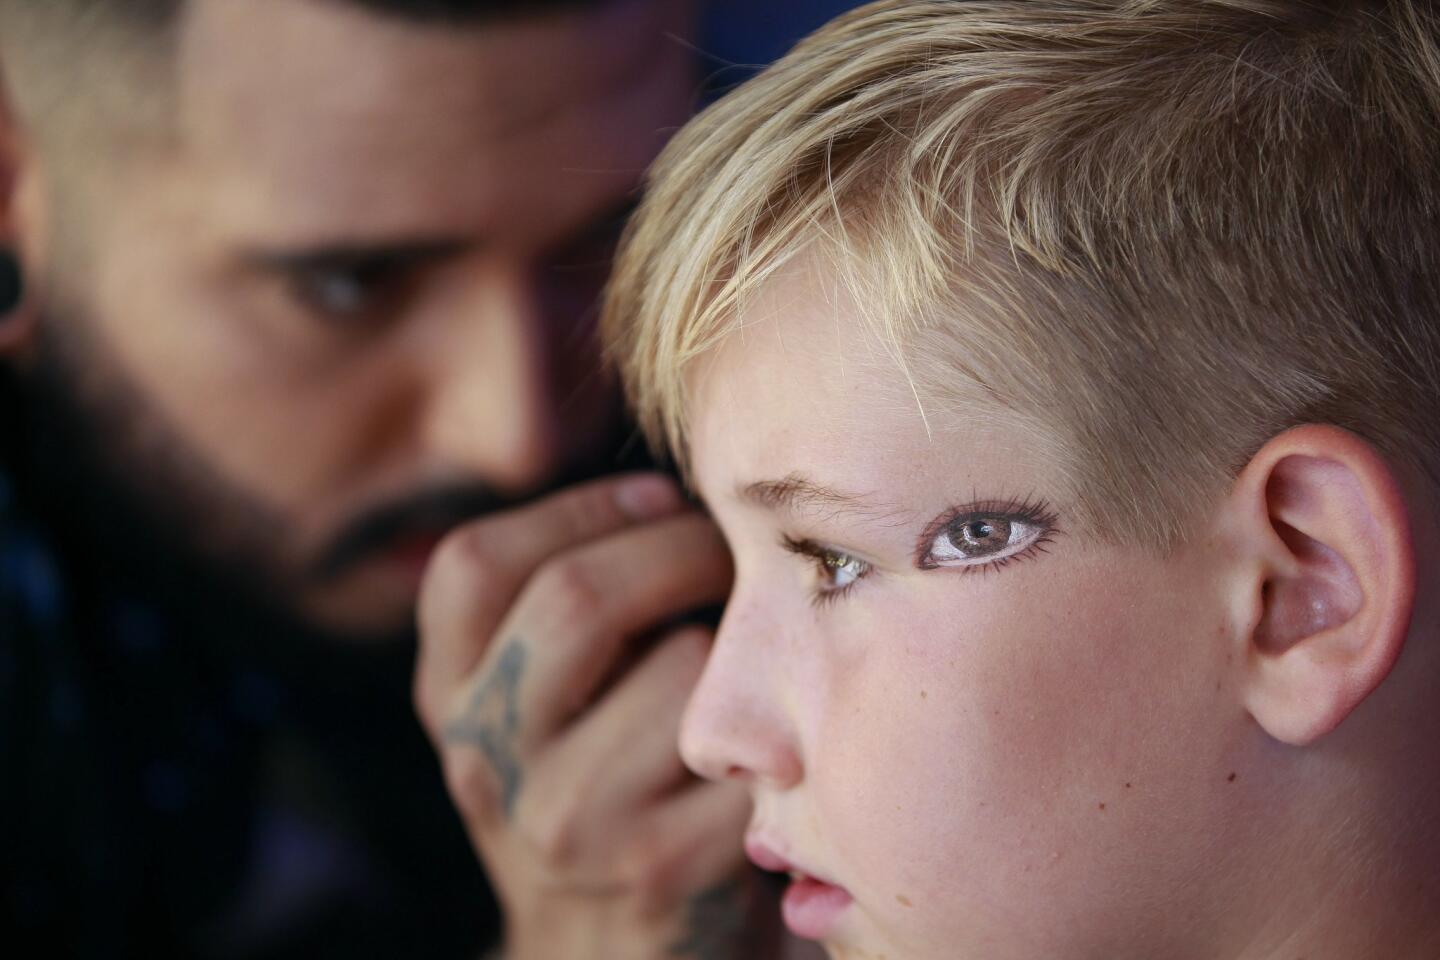 Lawson Cahill, 6, from San Diego, gets the second of two eyes painted on each temple by makeup artist Will Carrillo at the Mac Cosmetics booth outside of the San Diego Convention Center.